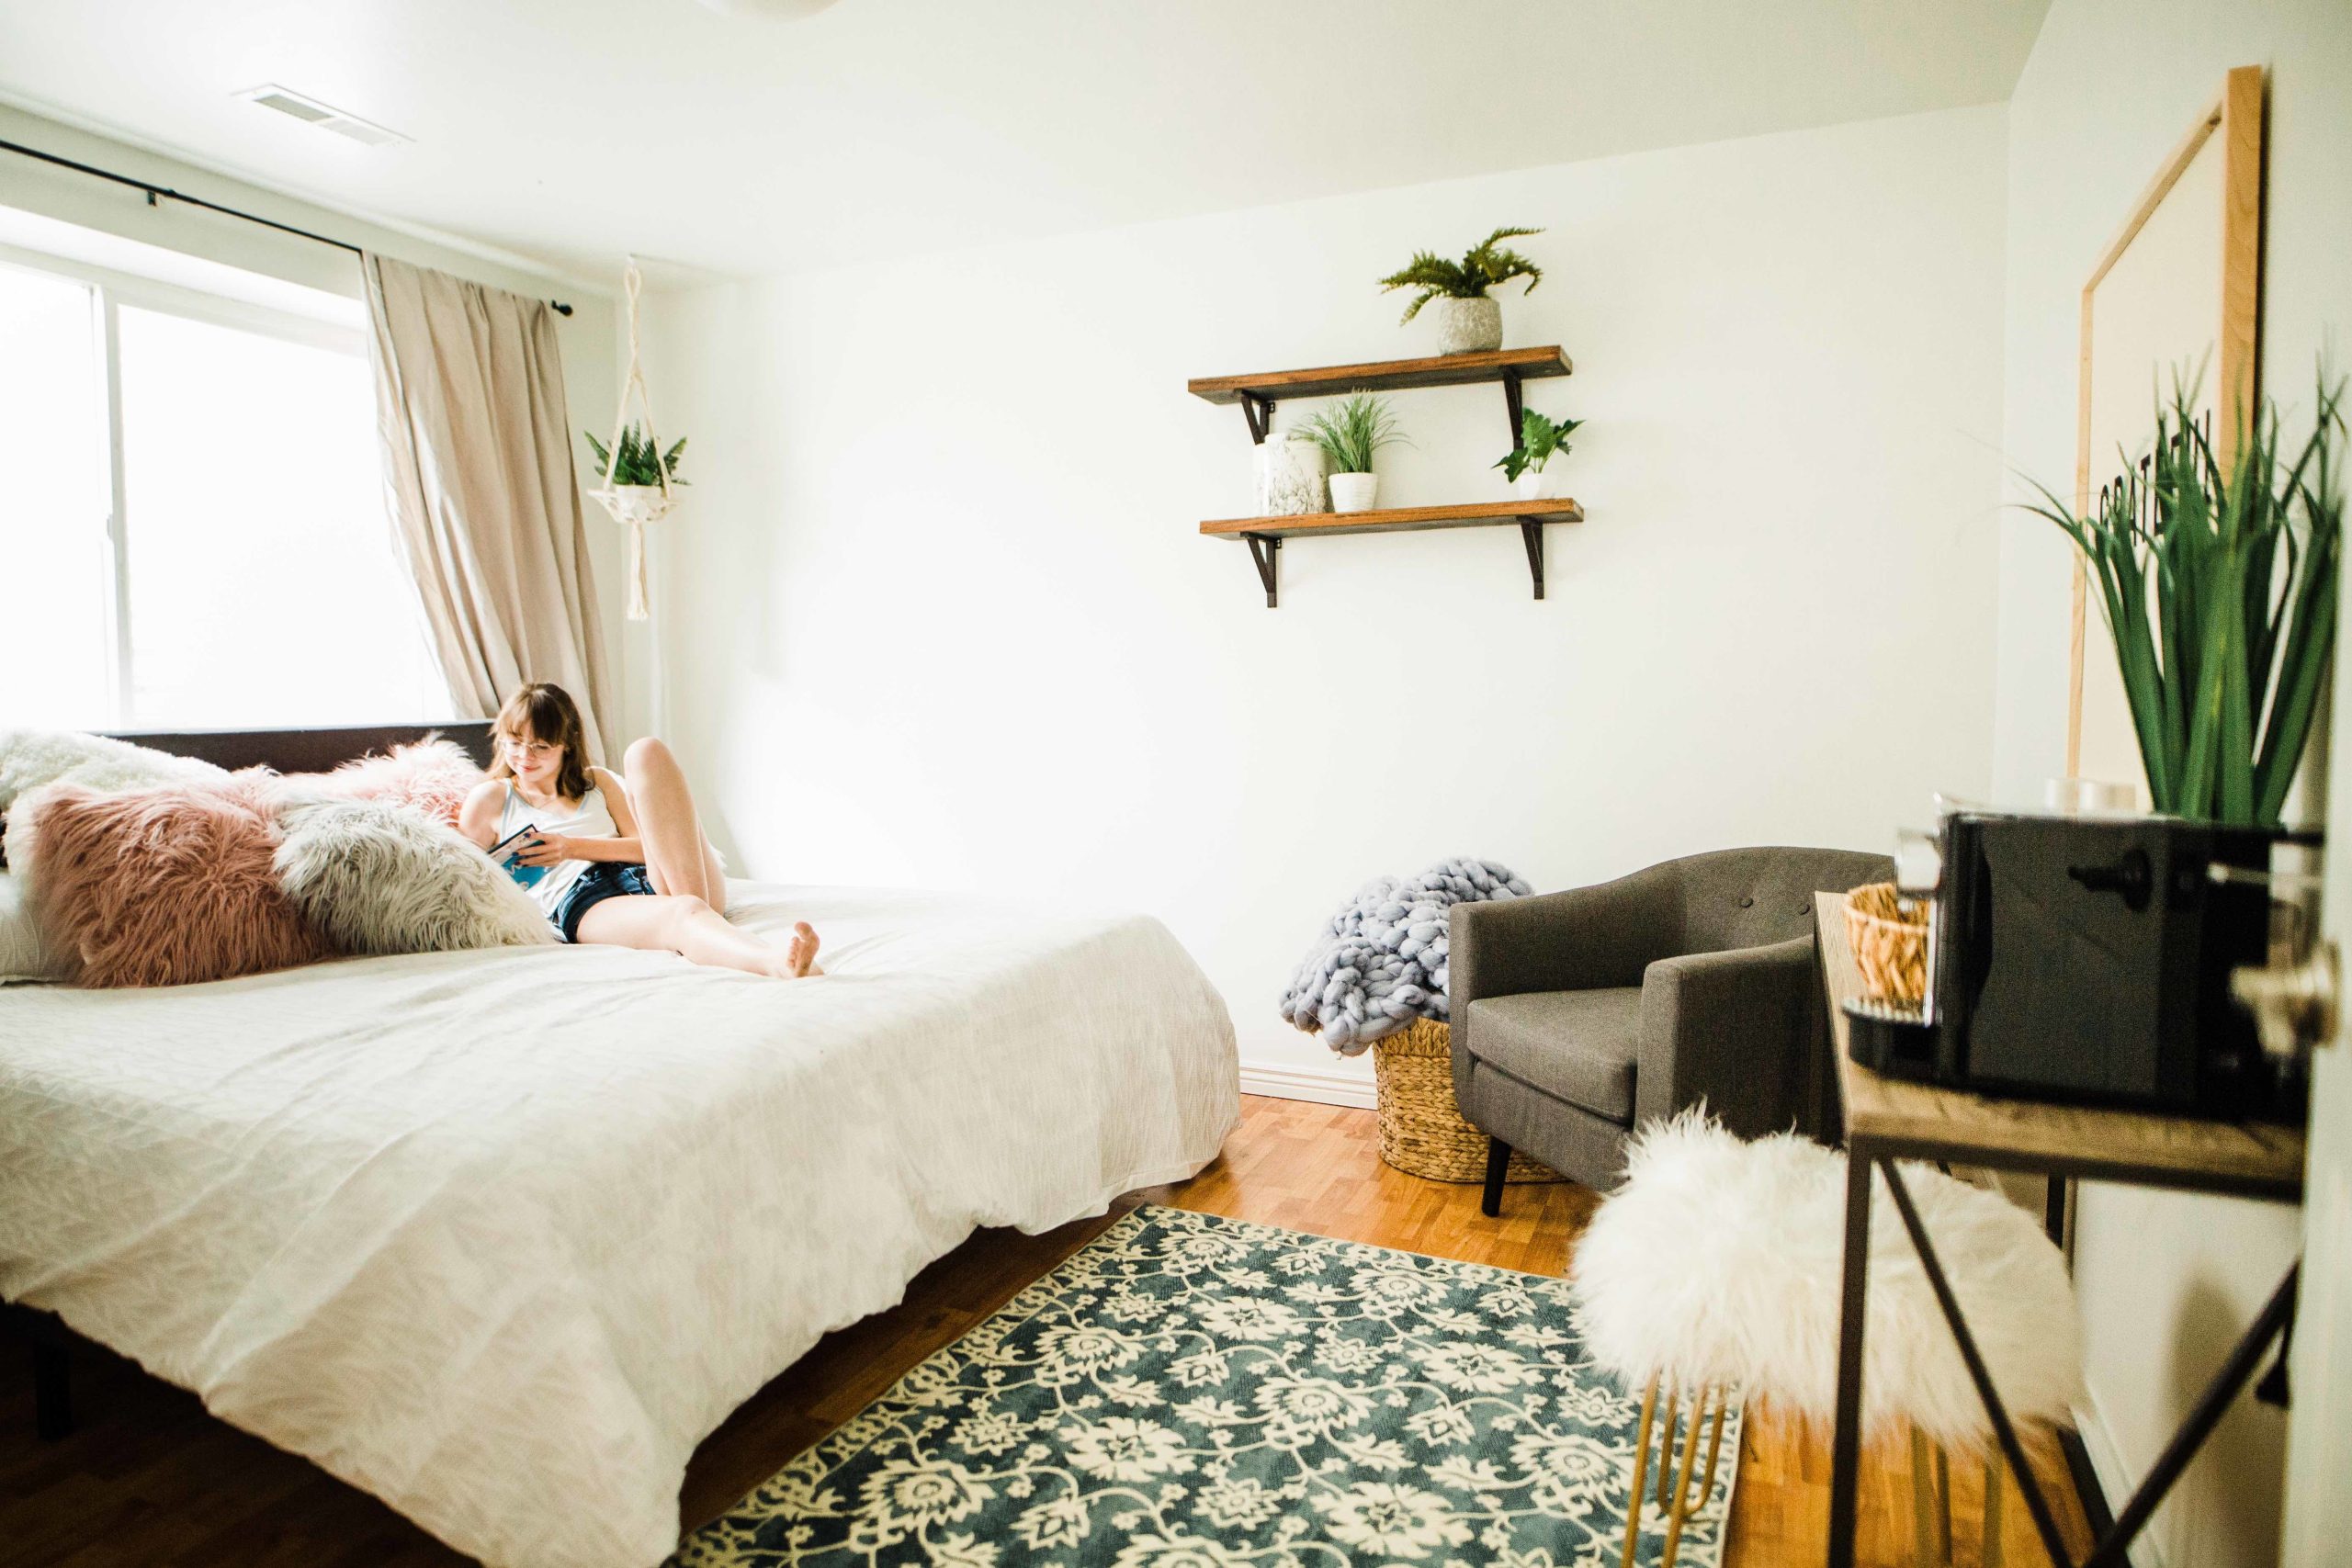 Build the Perfect Guest Bedroom Suite for Just $500